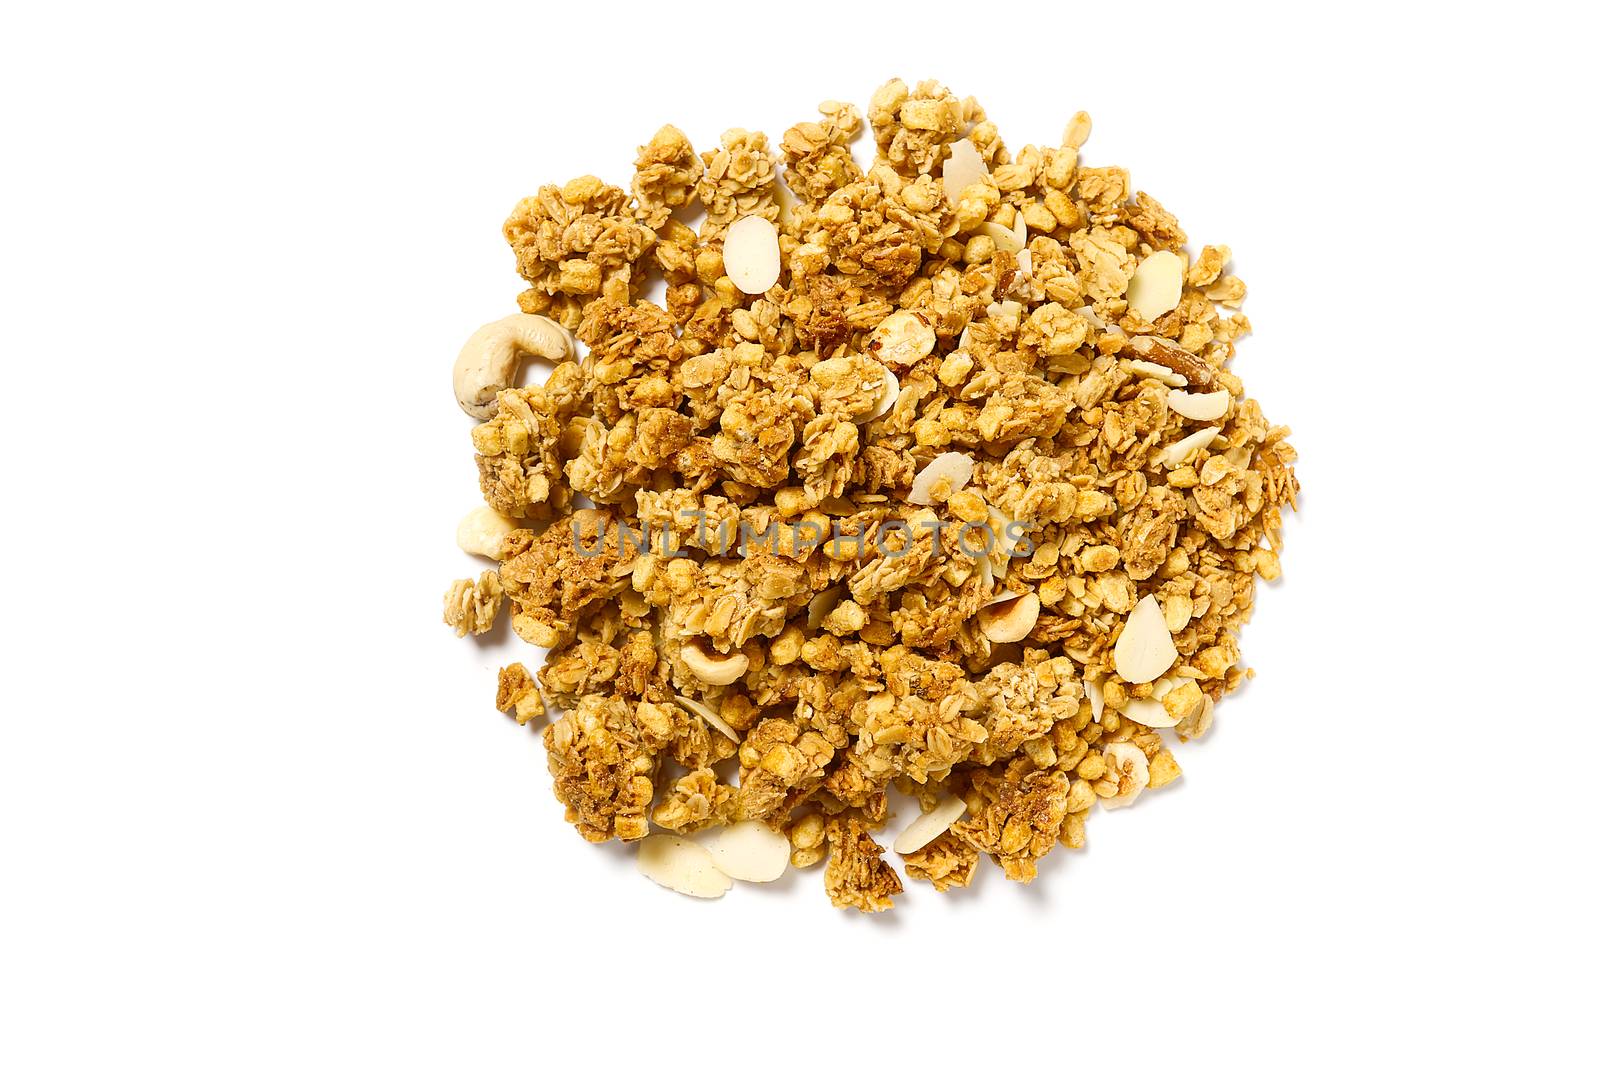 Small Granola Pile on a White Background. Small Muesli Pile with nuts isolated on white by PhotoTime